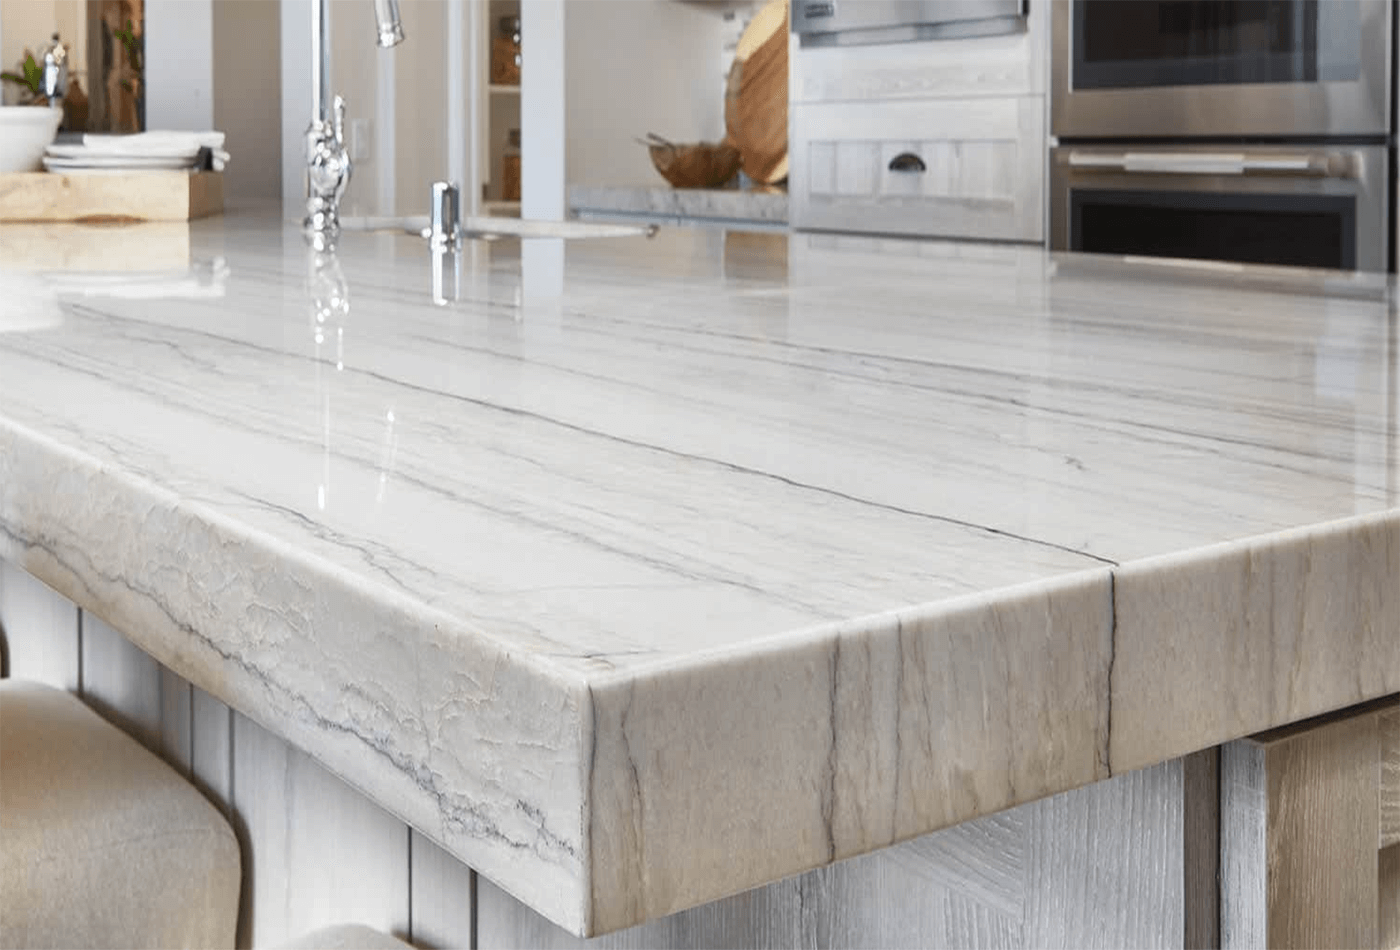 Quartzite Surface; Strength and Durability